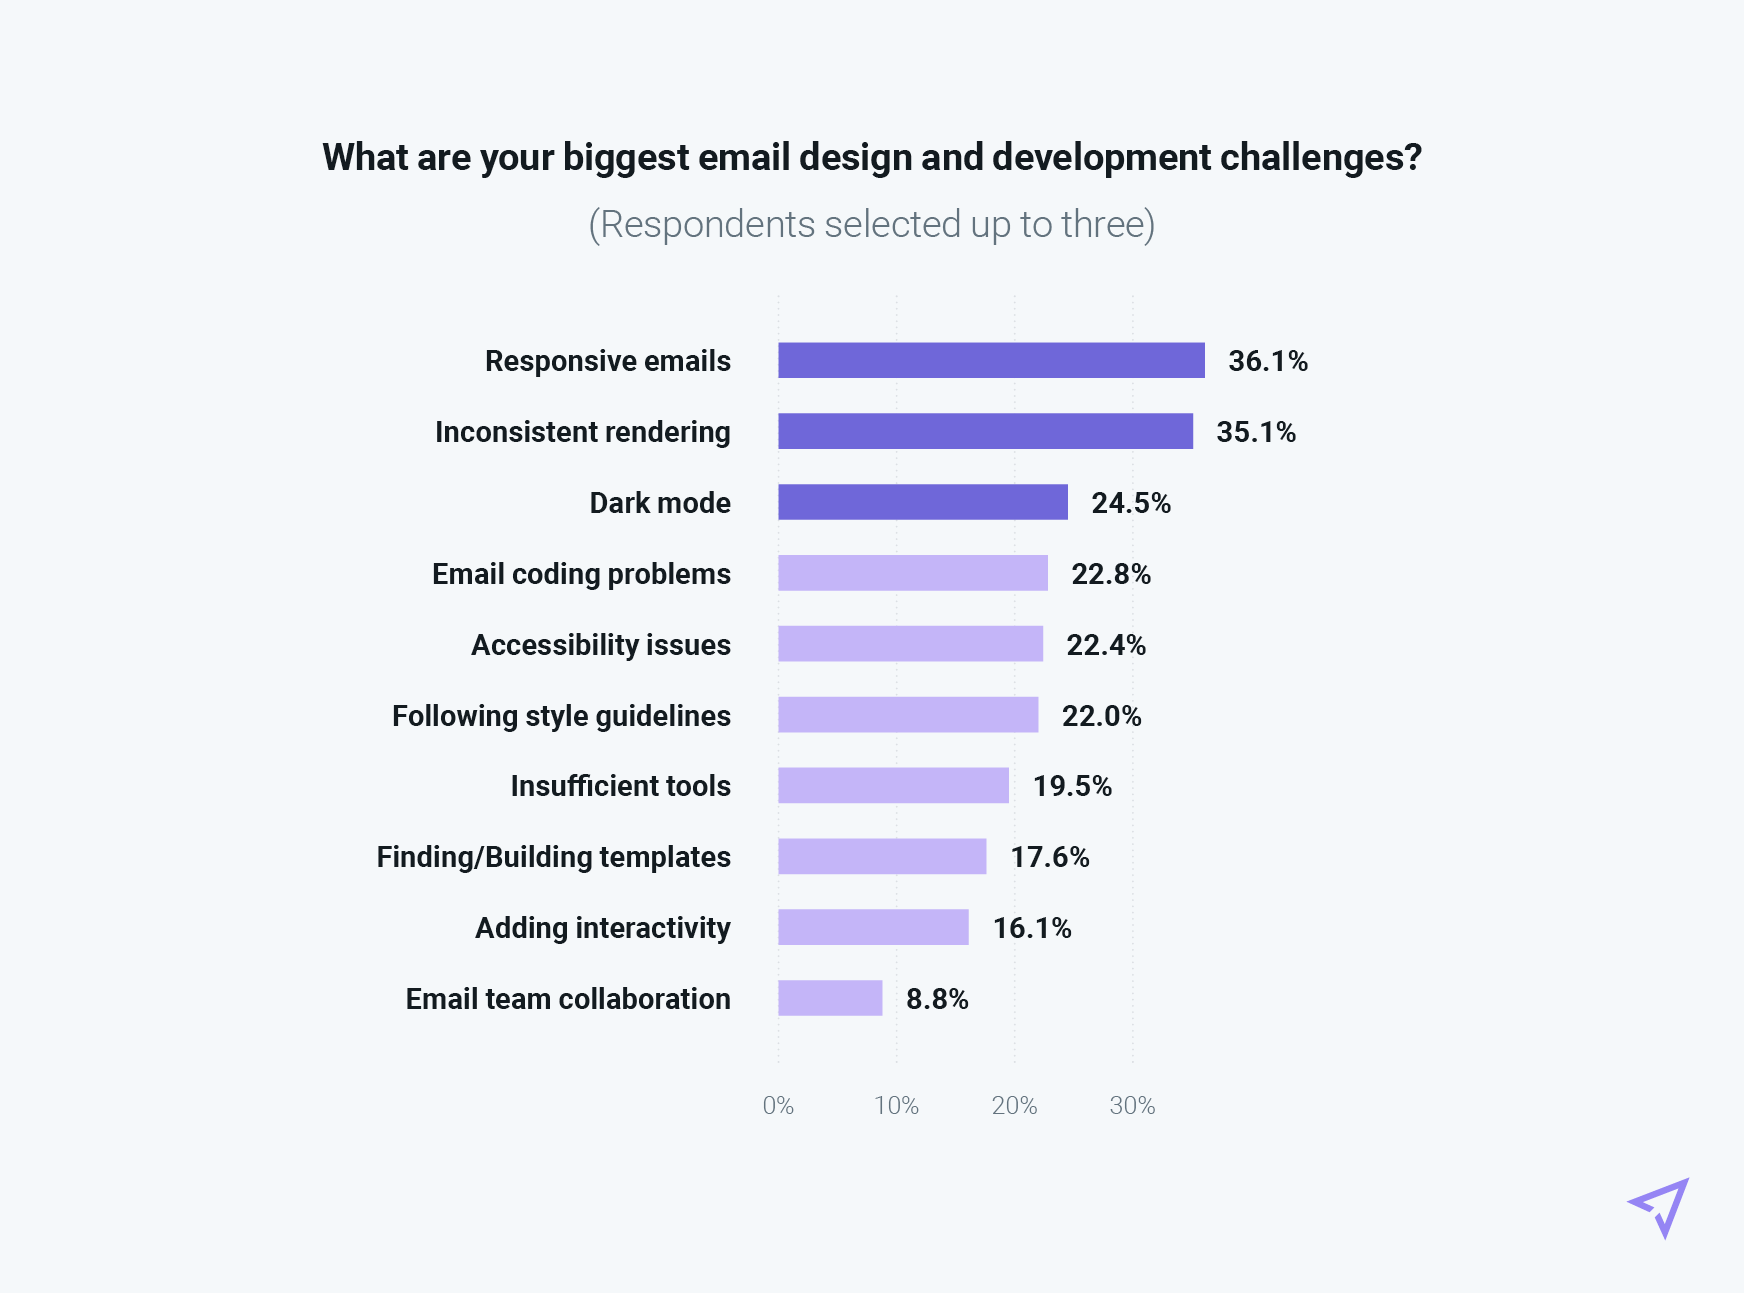 Graph showing results of respondents' biggest email design and development challenges